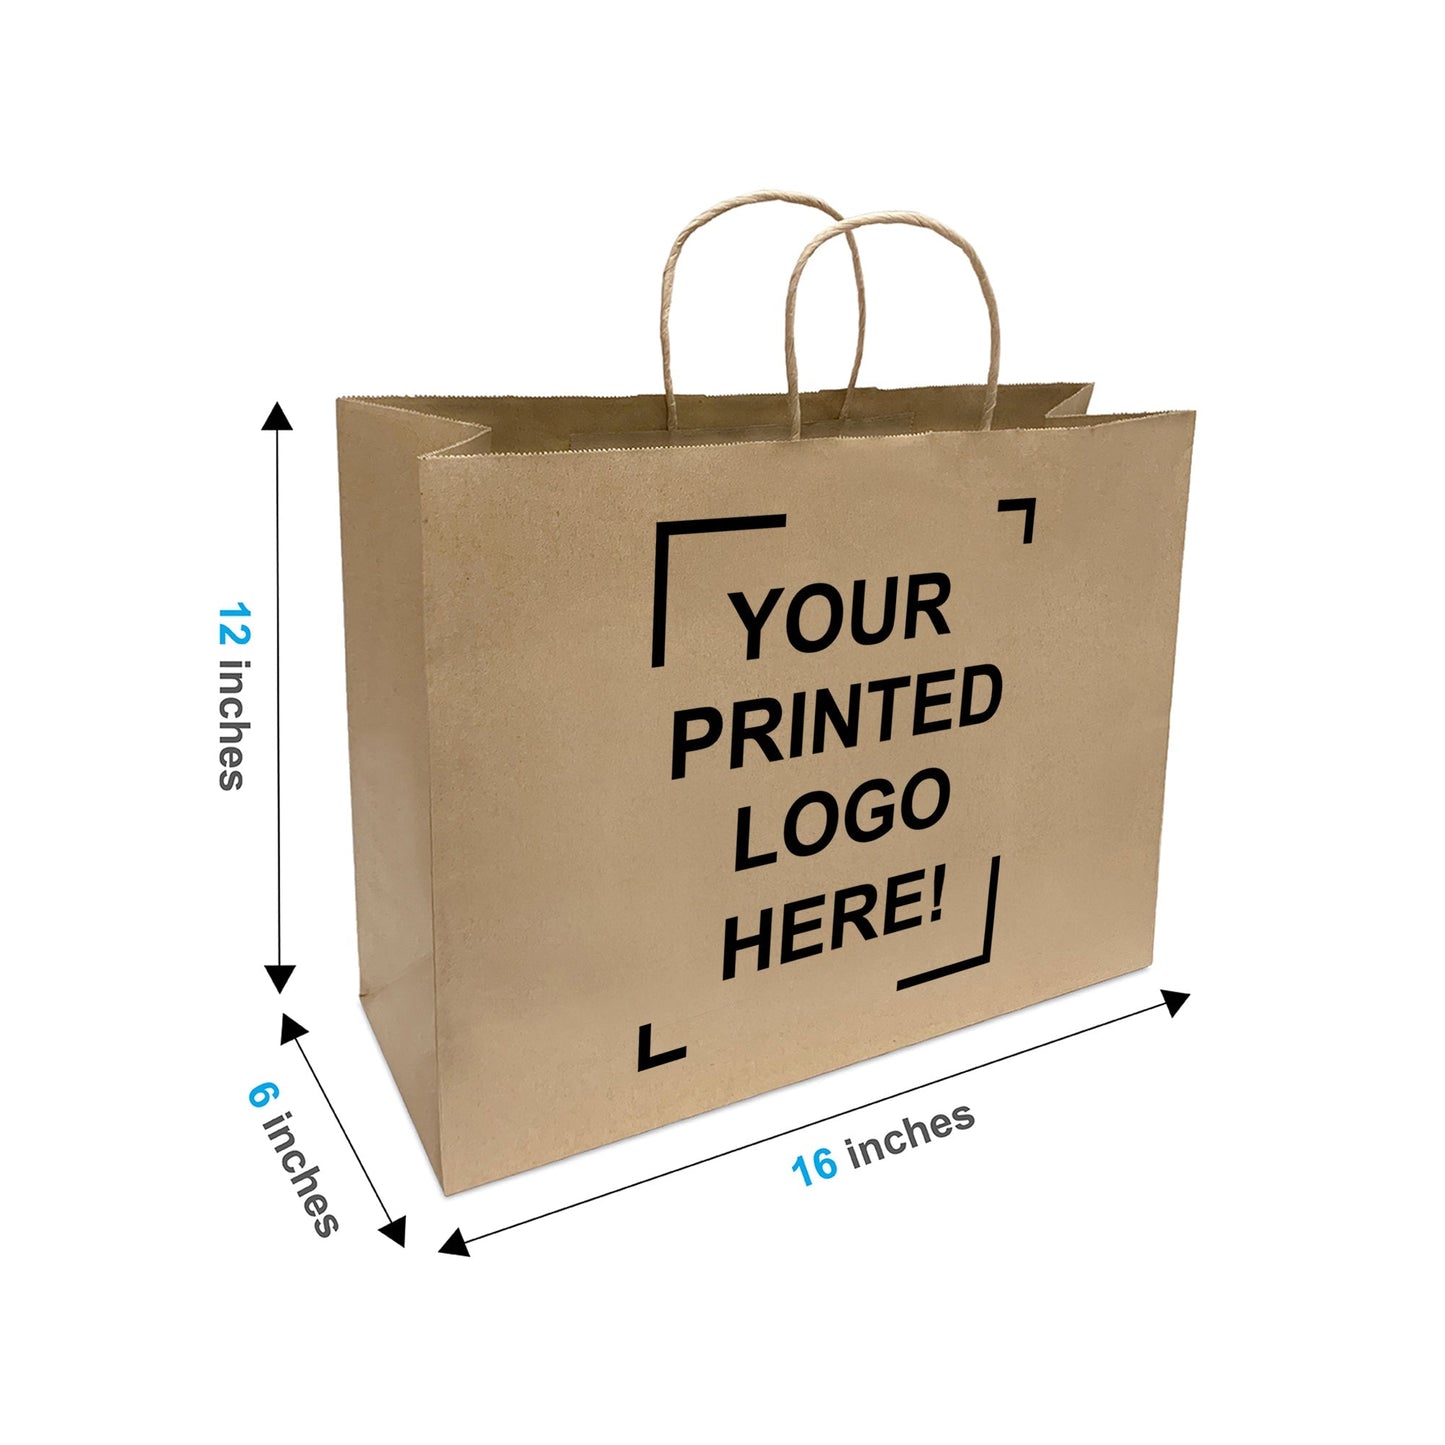 50pcs 1 Side Custom Print Vogue 16x6x12 inches Kraft Paper Bags Twisted Handles; $2.75/pc, Full Color Printed in North America